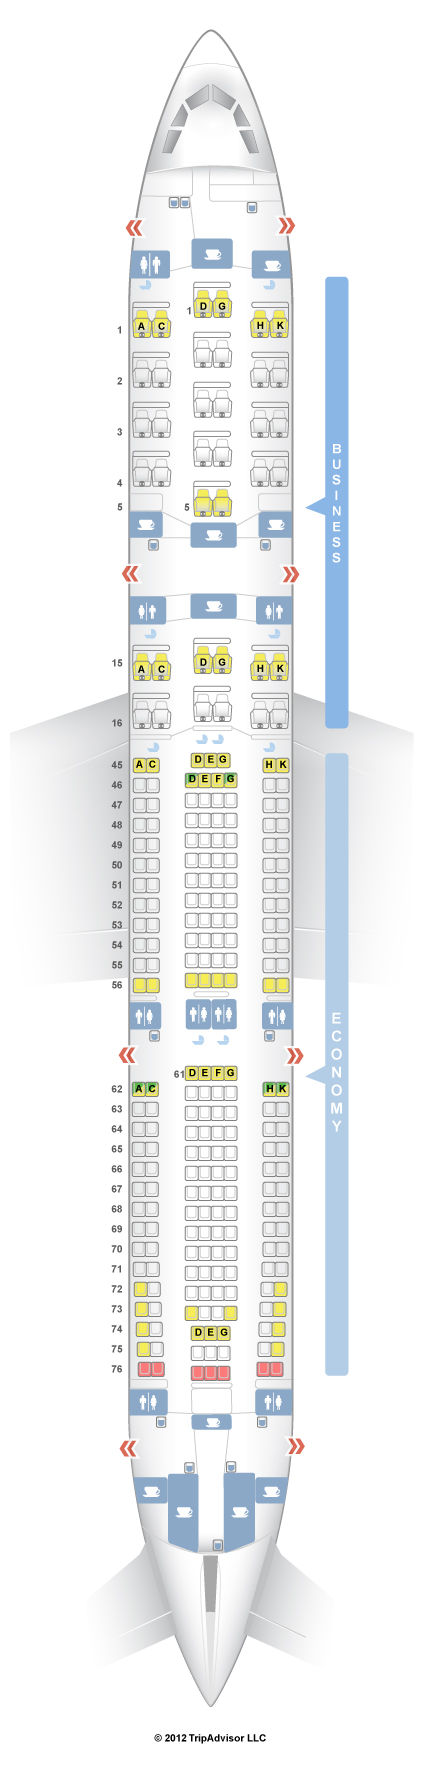 South African Airlines Seating Chart